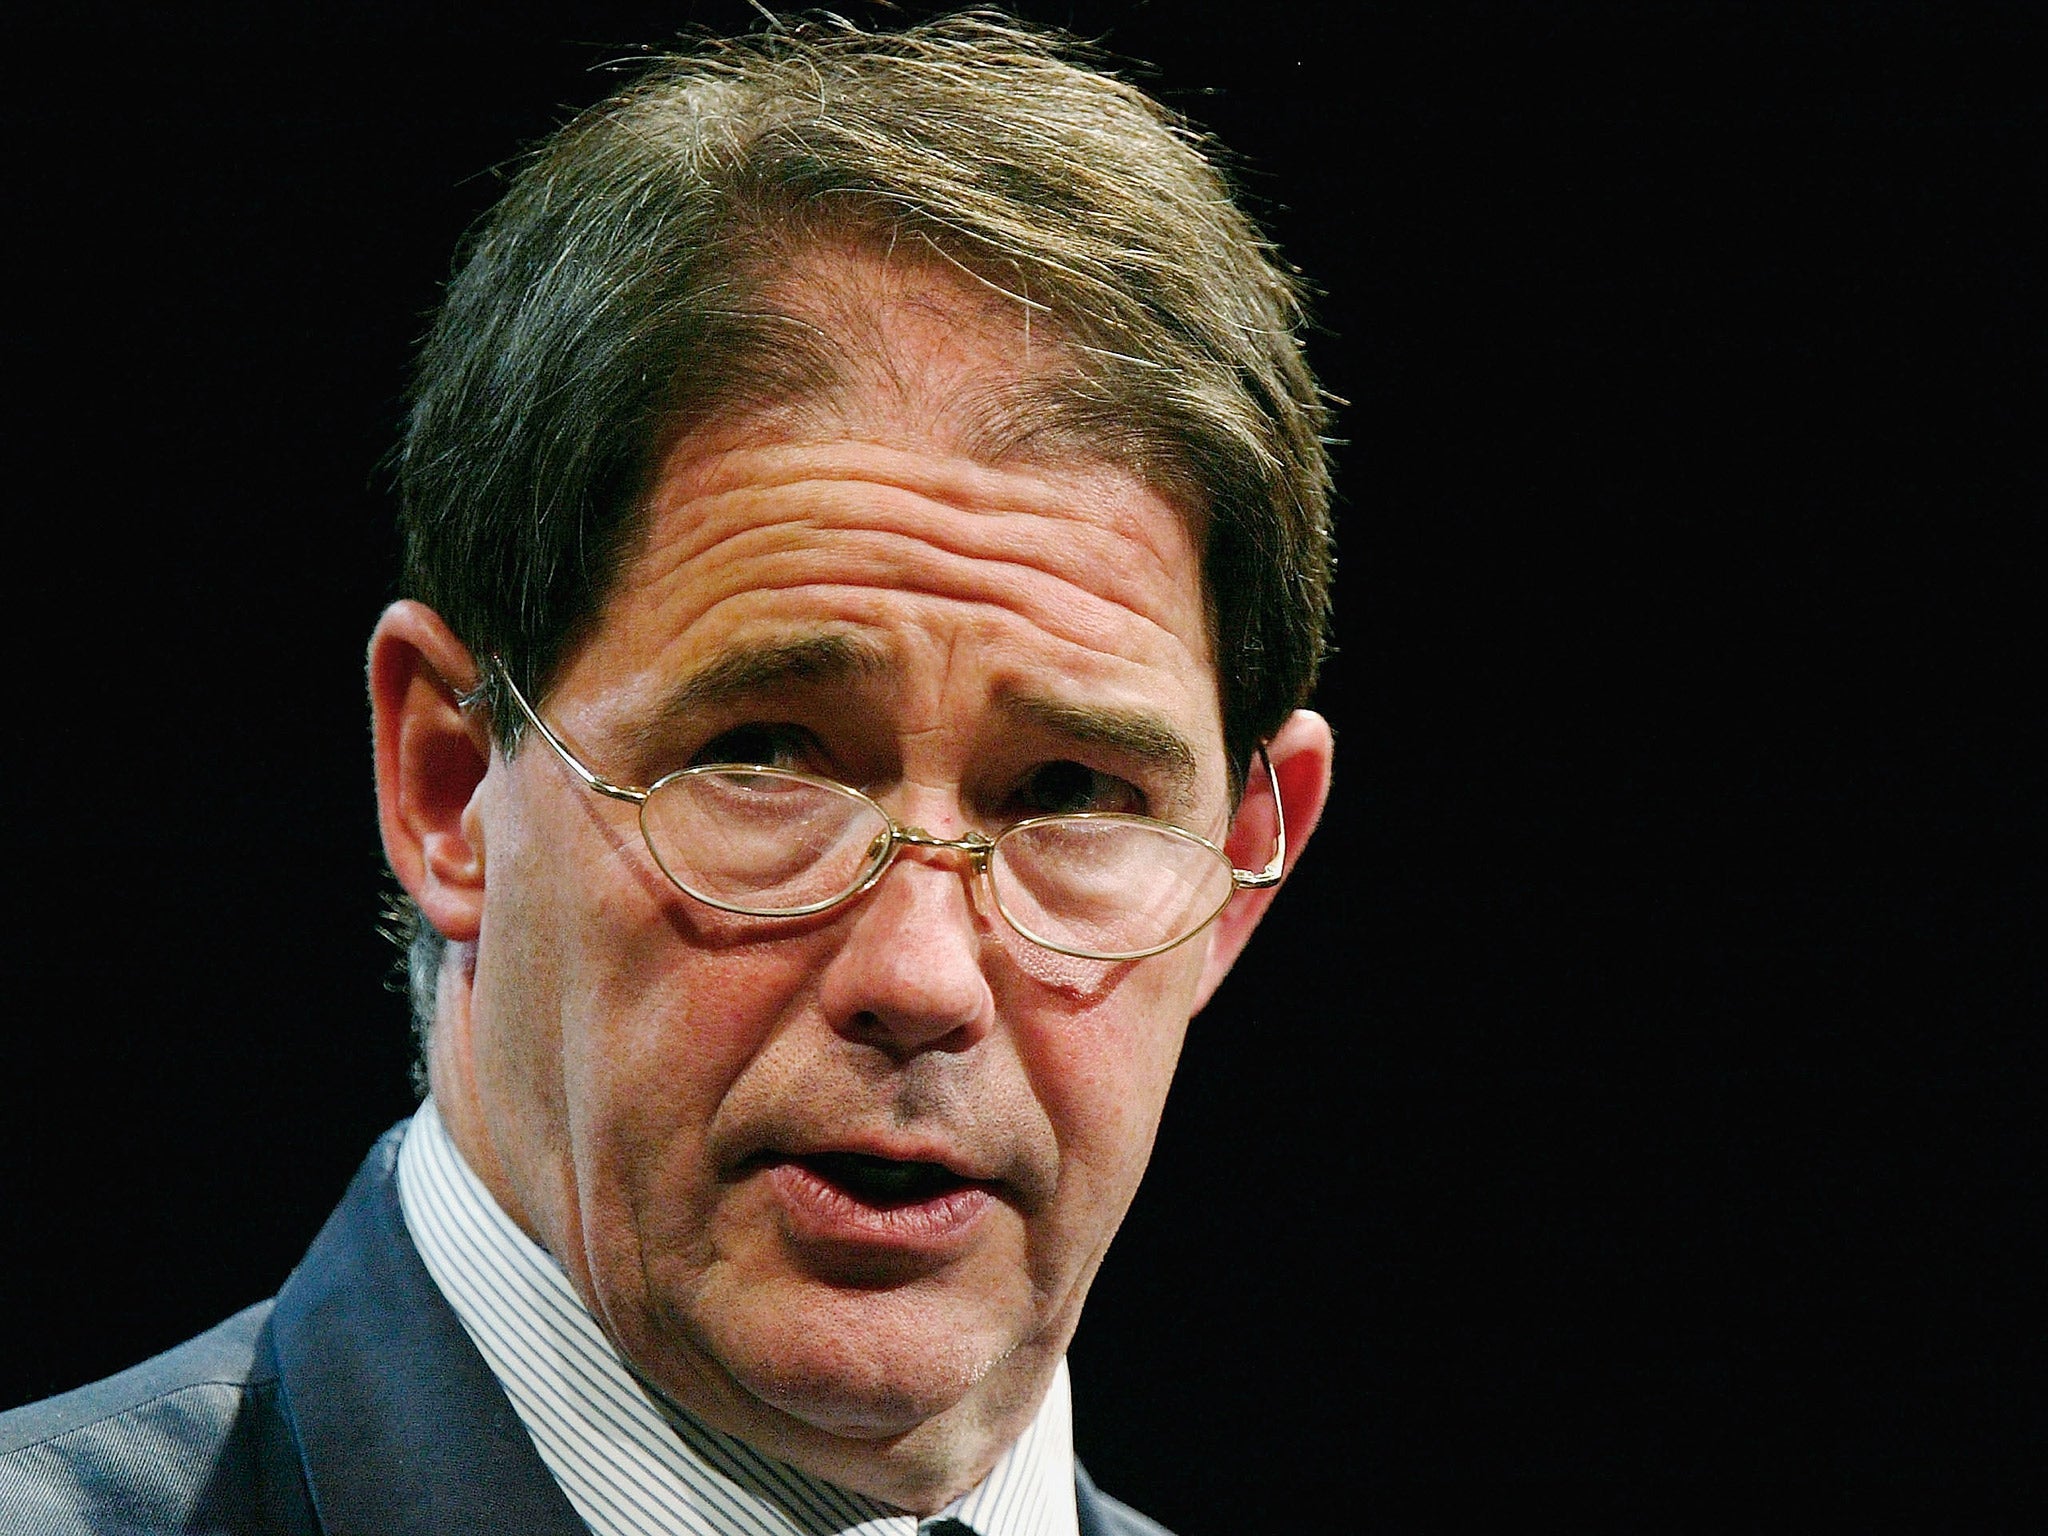 Jonathon Porritt is former chairman of the government's Sustainable Development Commission, a former director of Friends of the Earth and the founder-director of the think tank Forum for the Future